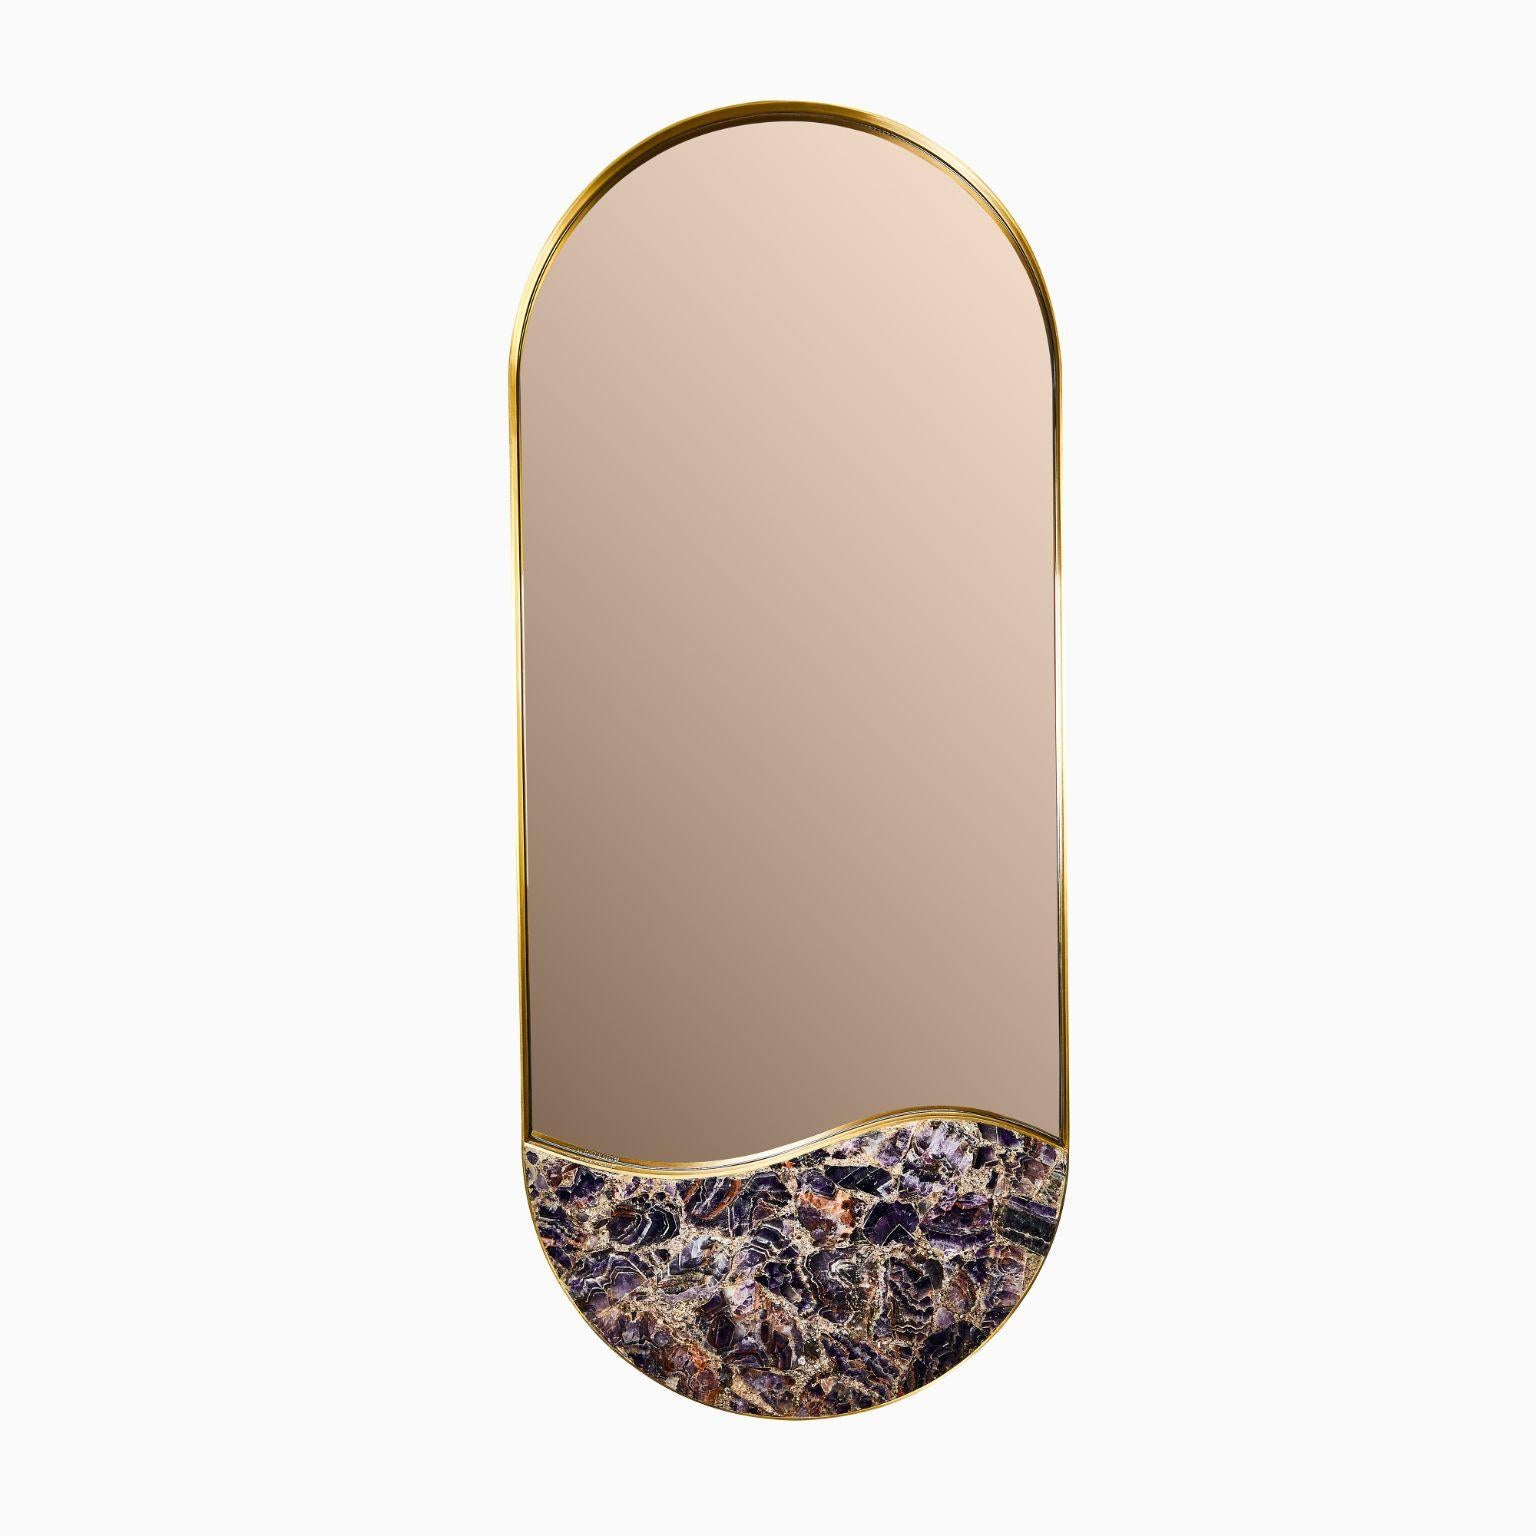 Kura mirror amethyst by Marble Balloon
Dimensions: 120 x 50 x 5 cm
Materials: Brass, onyx green stone.

100% brass material is used in the frame and green onyx stone is used in the lower part.

Marble Balloon is an interior design and high end